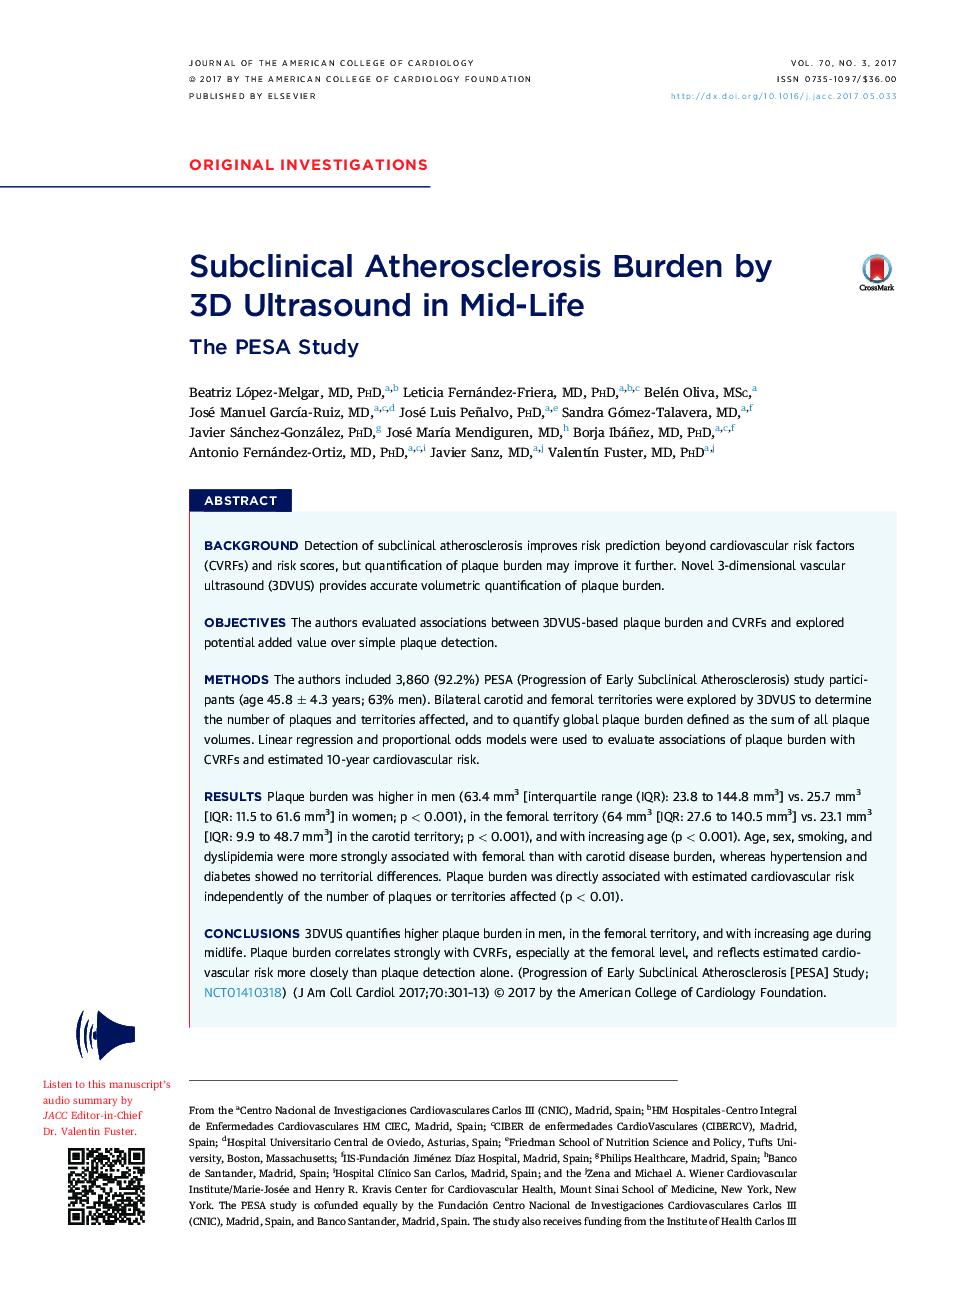 Subclinical Atherosclerosis Burden by 3DÂ Ultrasound in Mid-Life